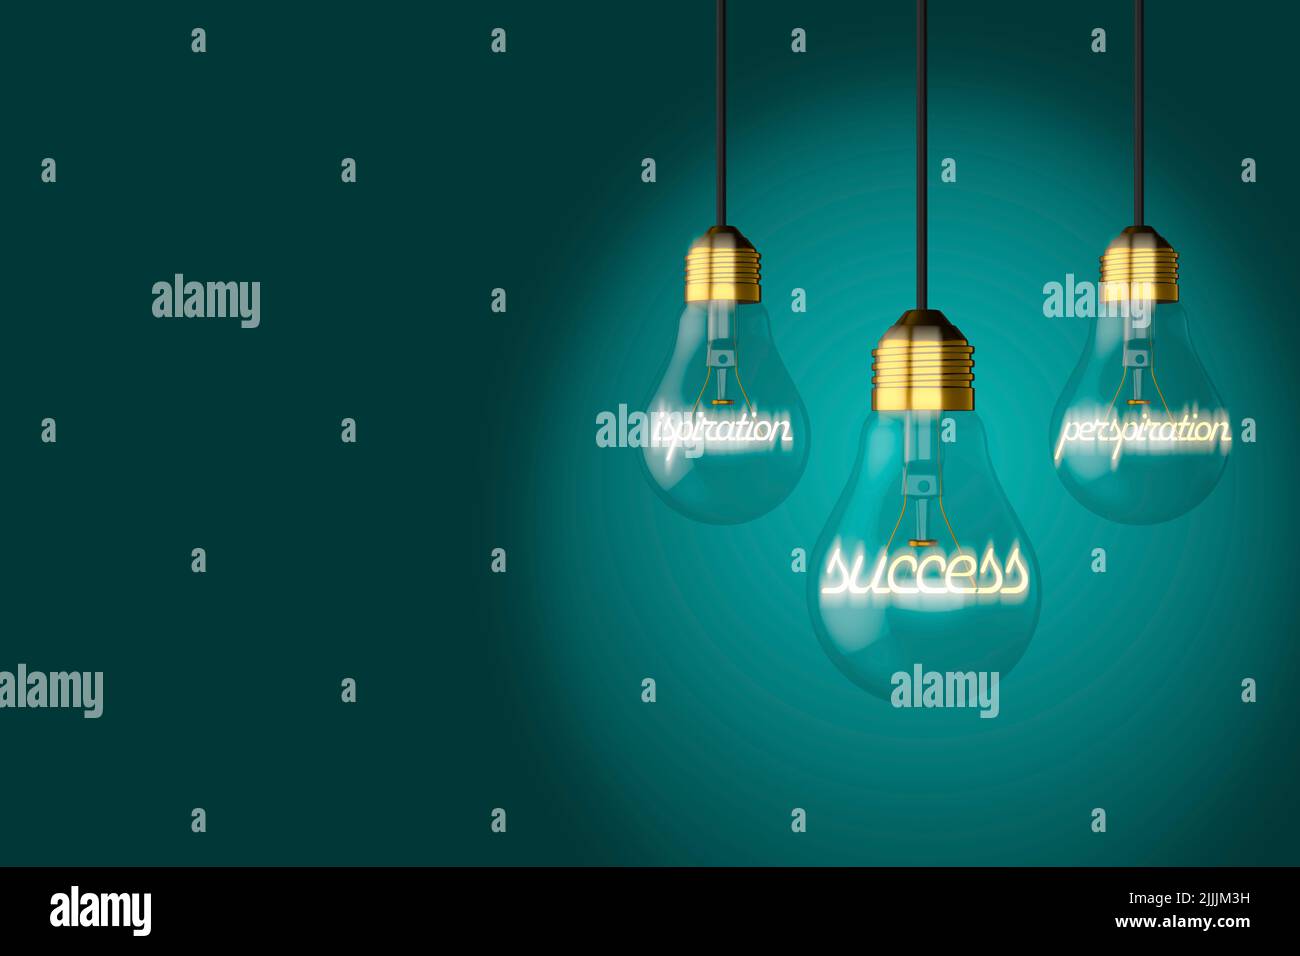 old style light bulbs lightbulbs illustrating inspiration perspiration success concept on a colourful colorful blue background Stock Photo